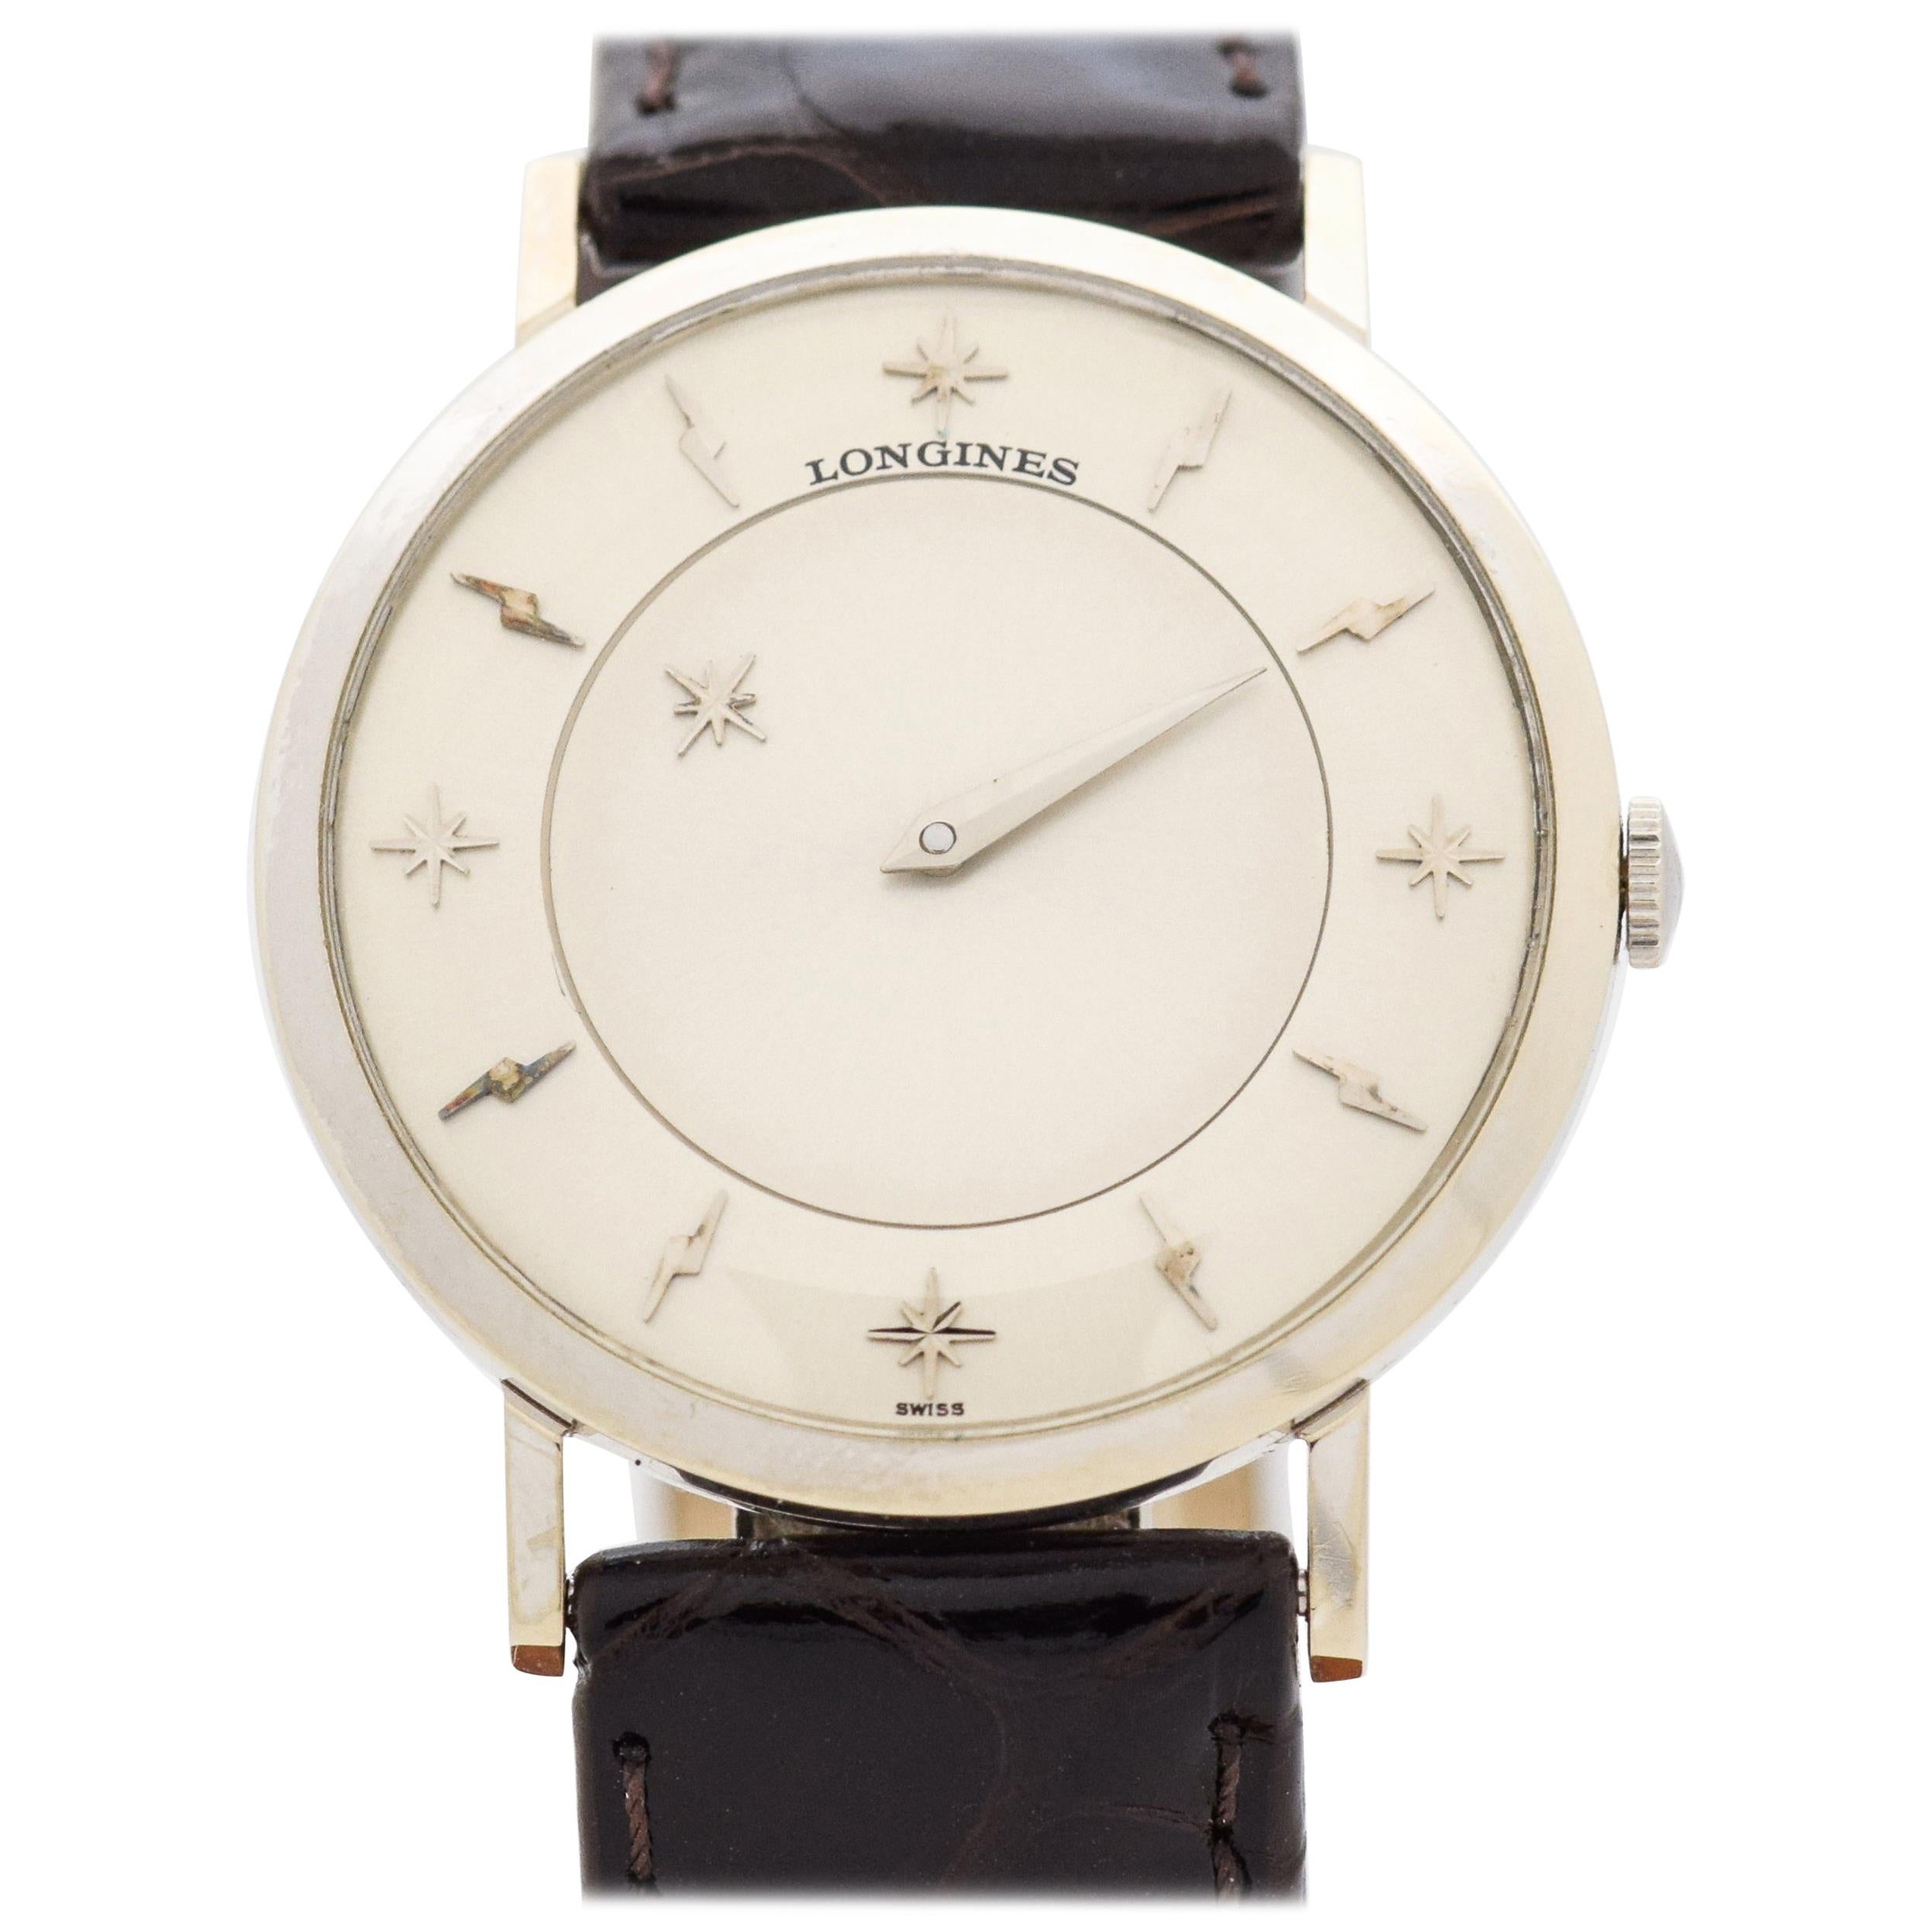 Vintage Longines Mystery Dial 10 Karat White Gold Filled Watch, 1959 For Sale